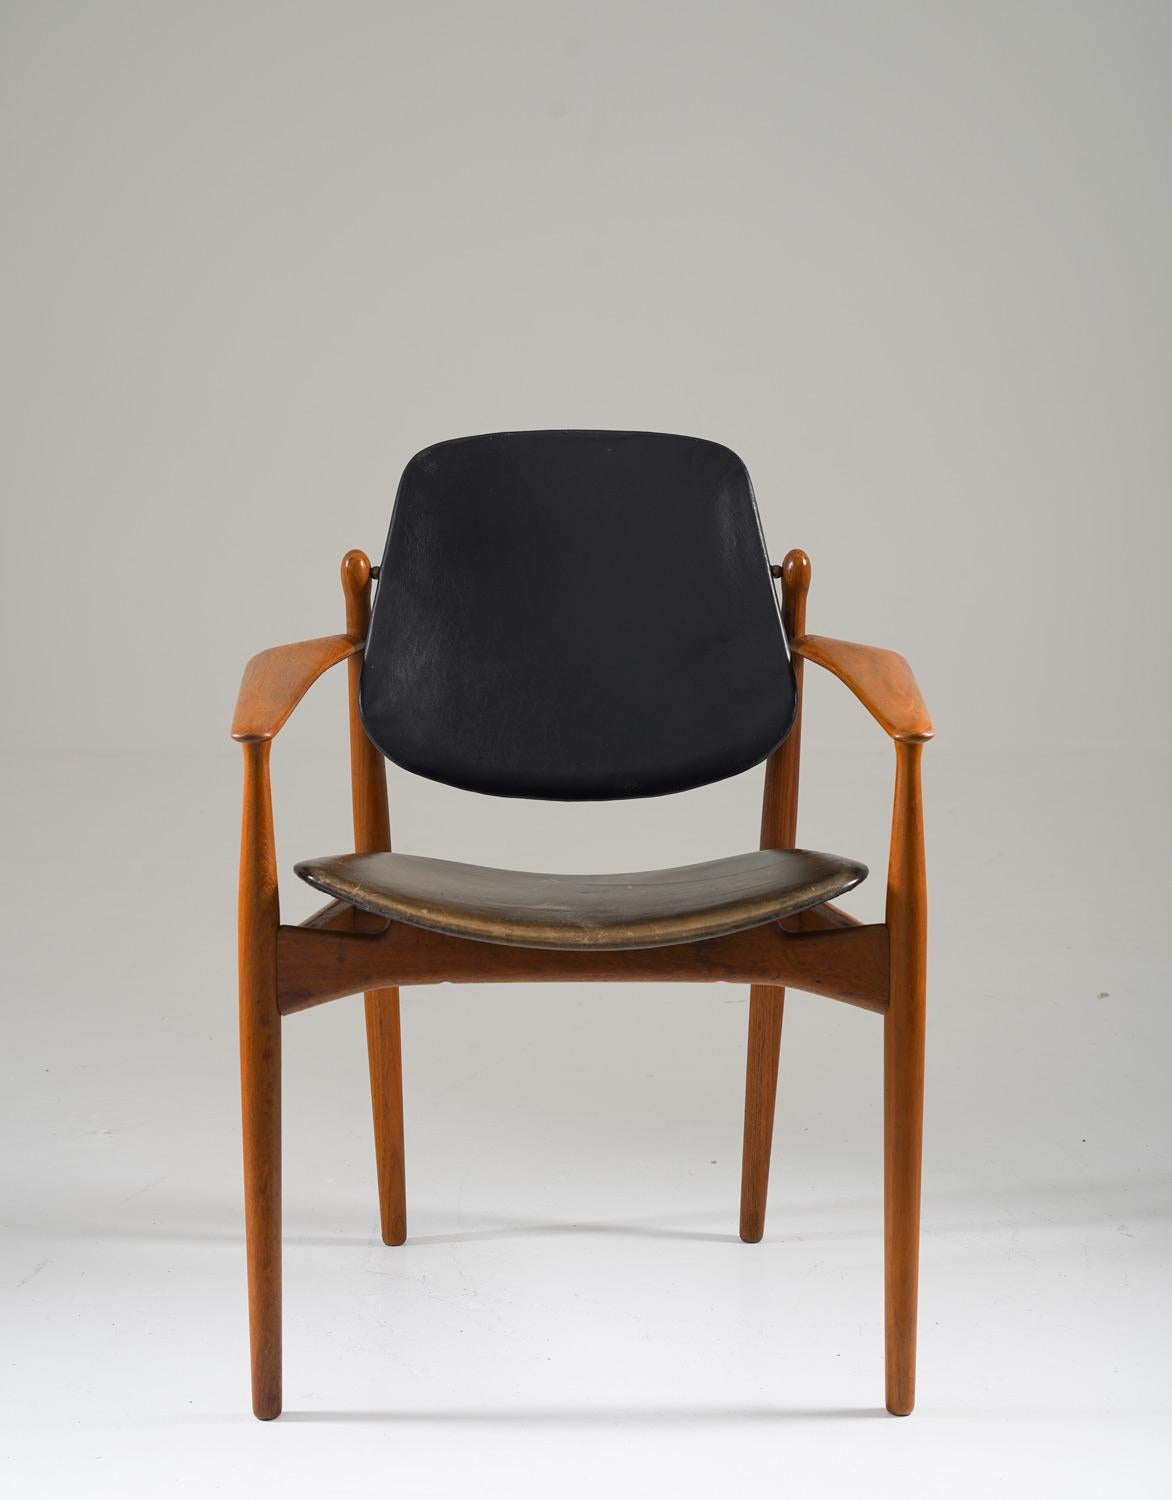 Black leather and teak chair by Arne Vodder for France & Daverkosen, Denmark.
The chair has a wonderfully neat design and has perfect proportions. And the most beautiful part of the chair is the sculptural piece of wood holding the backrest. 
The